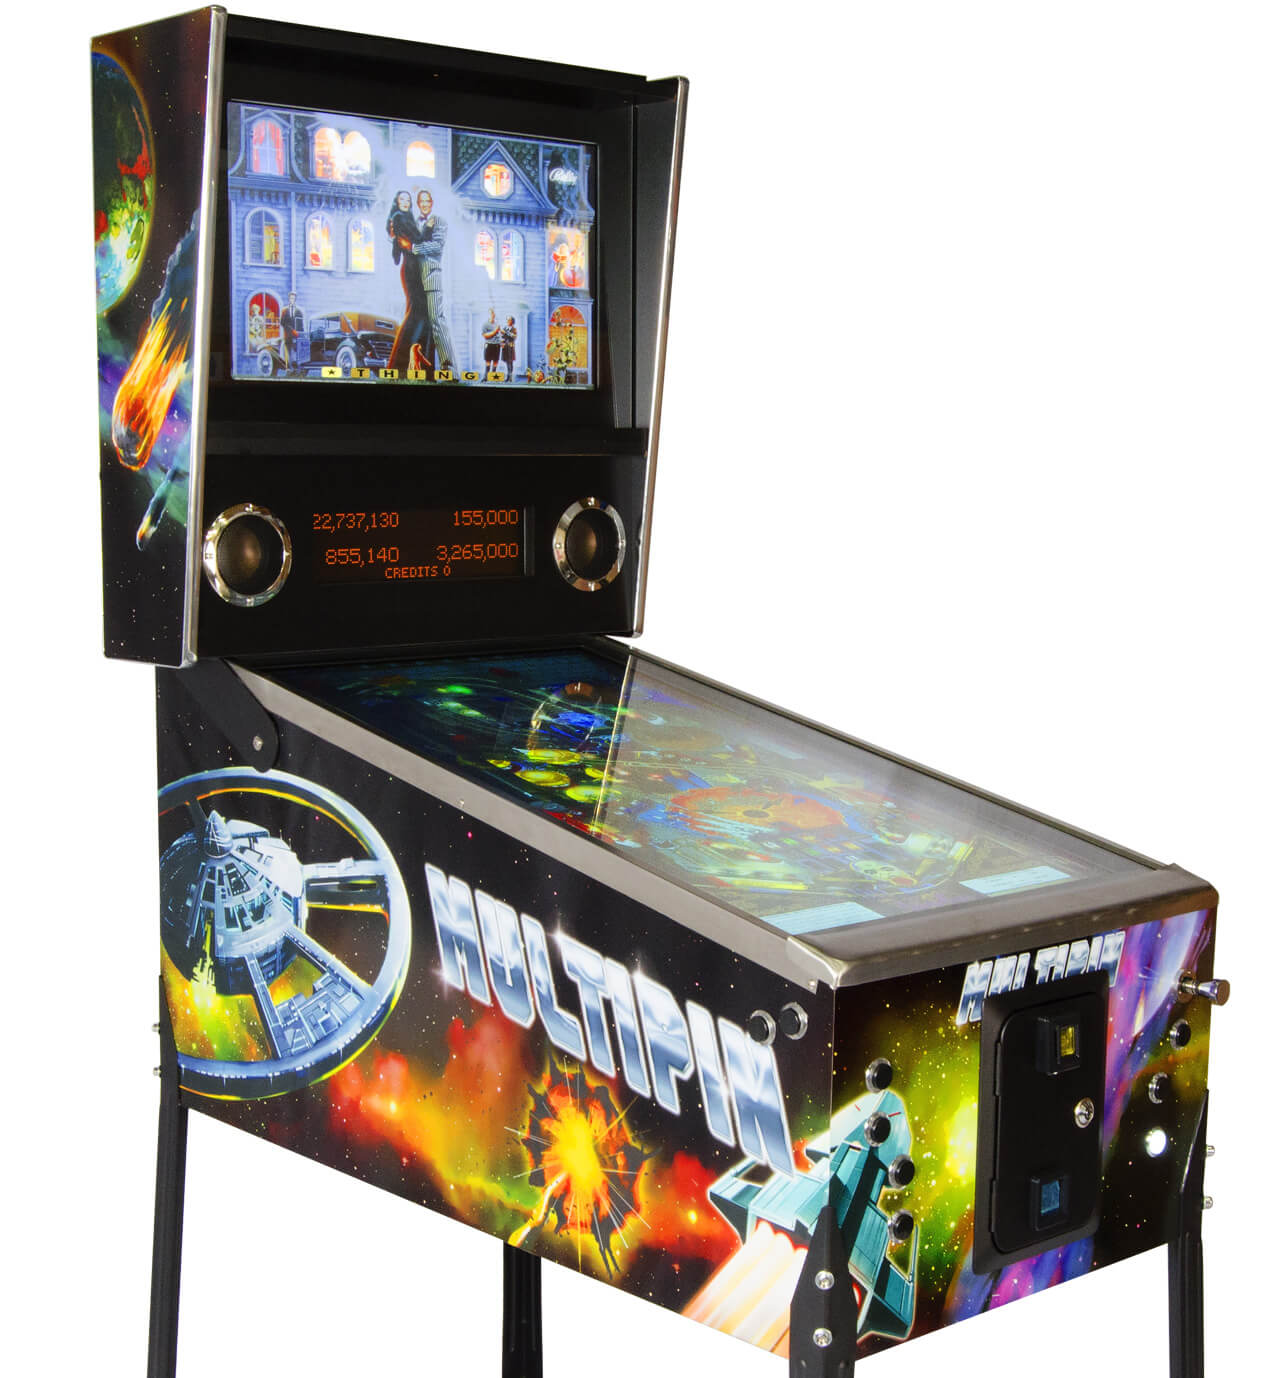 The 10 Best Pinball Machines Reviews and Buying Guide! Mancaves HQ